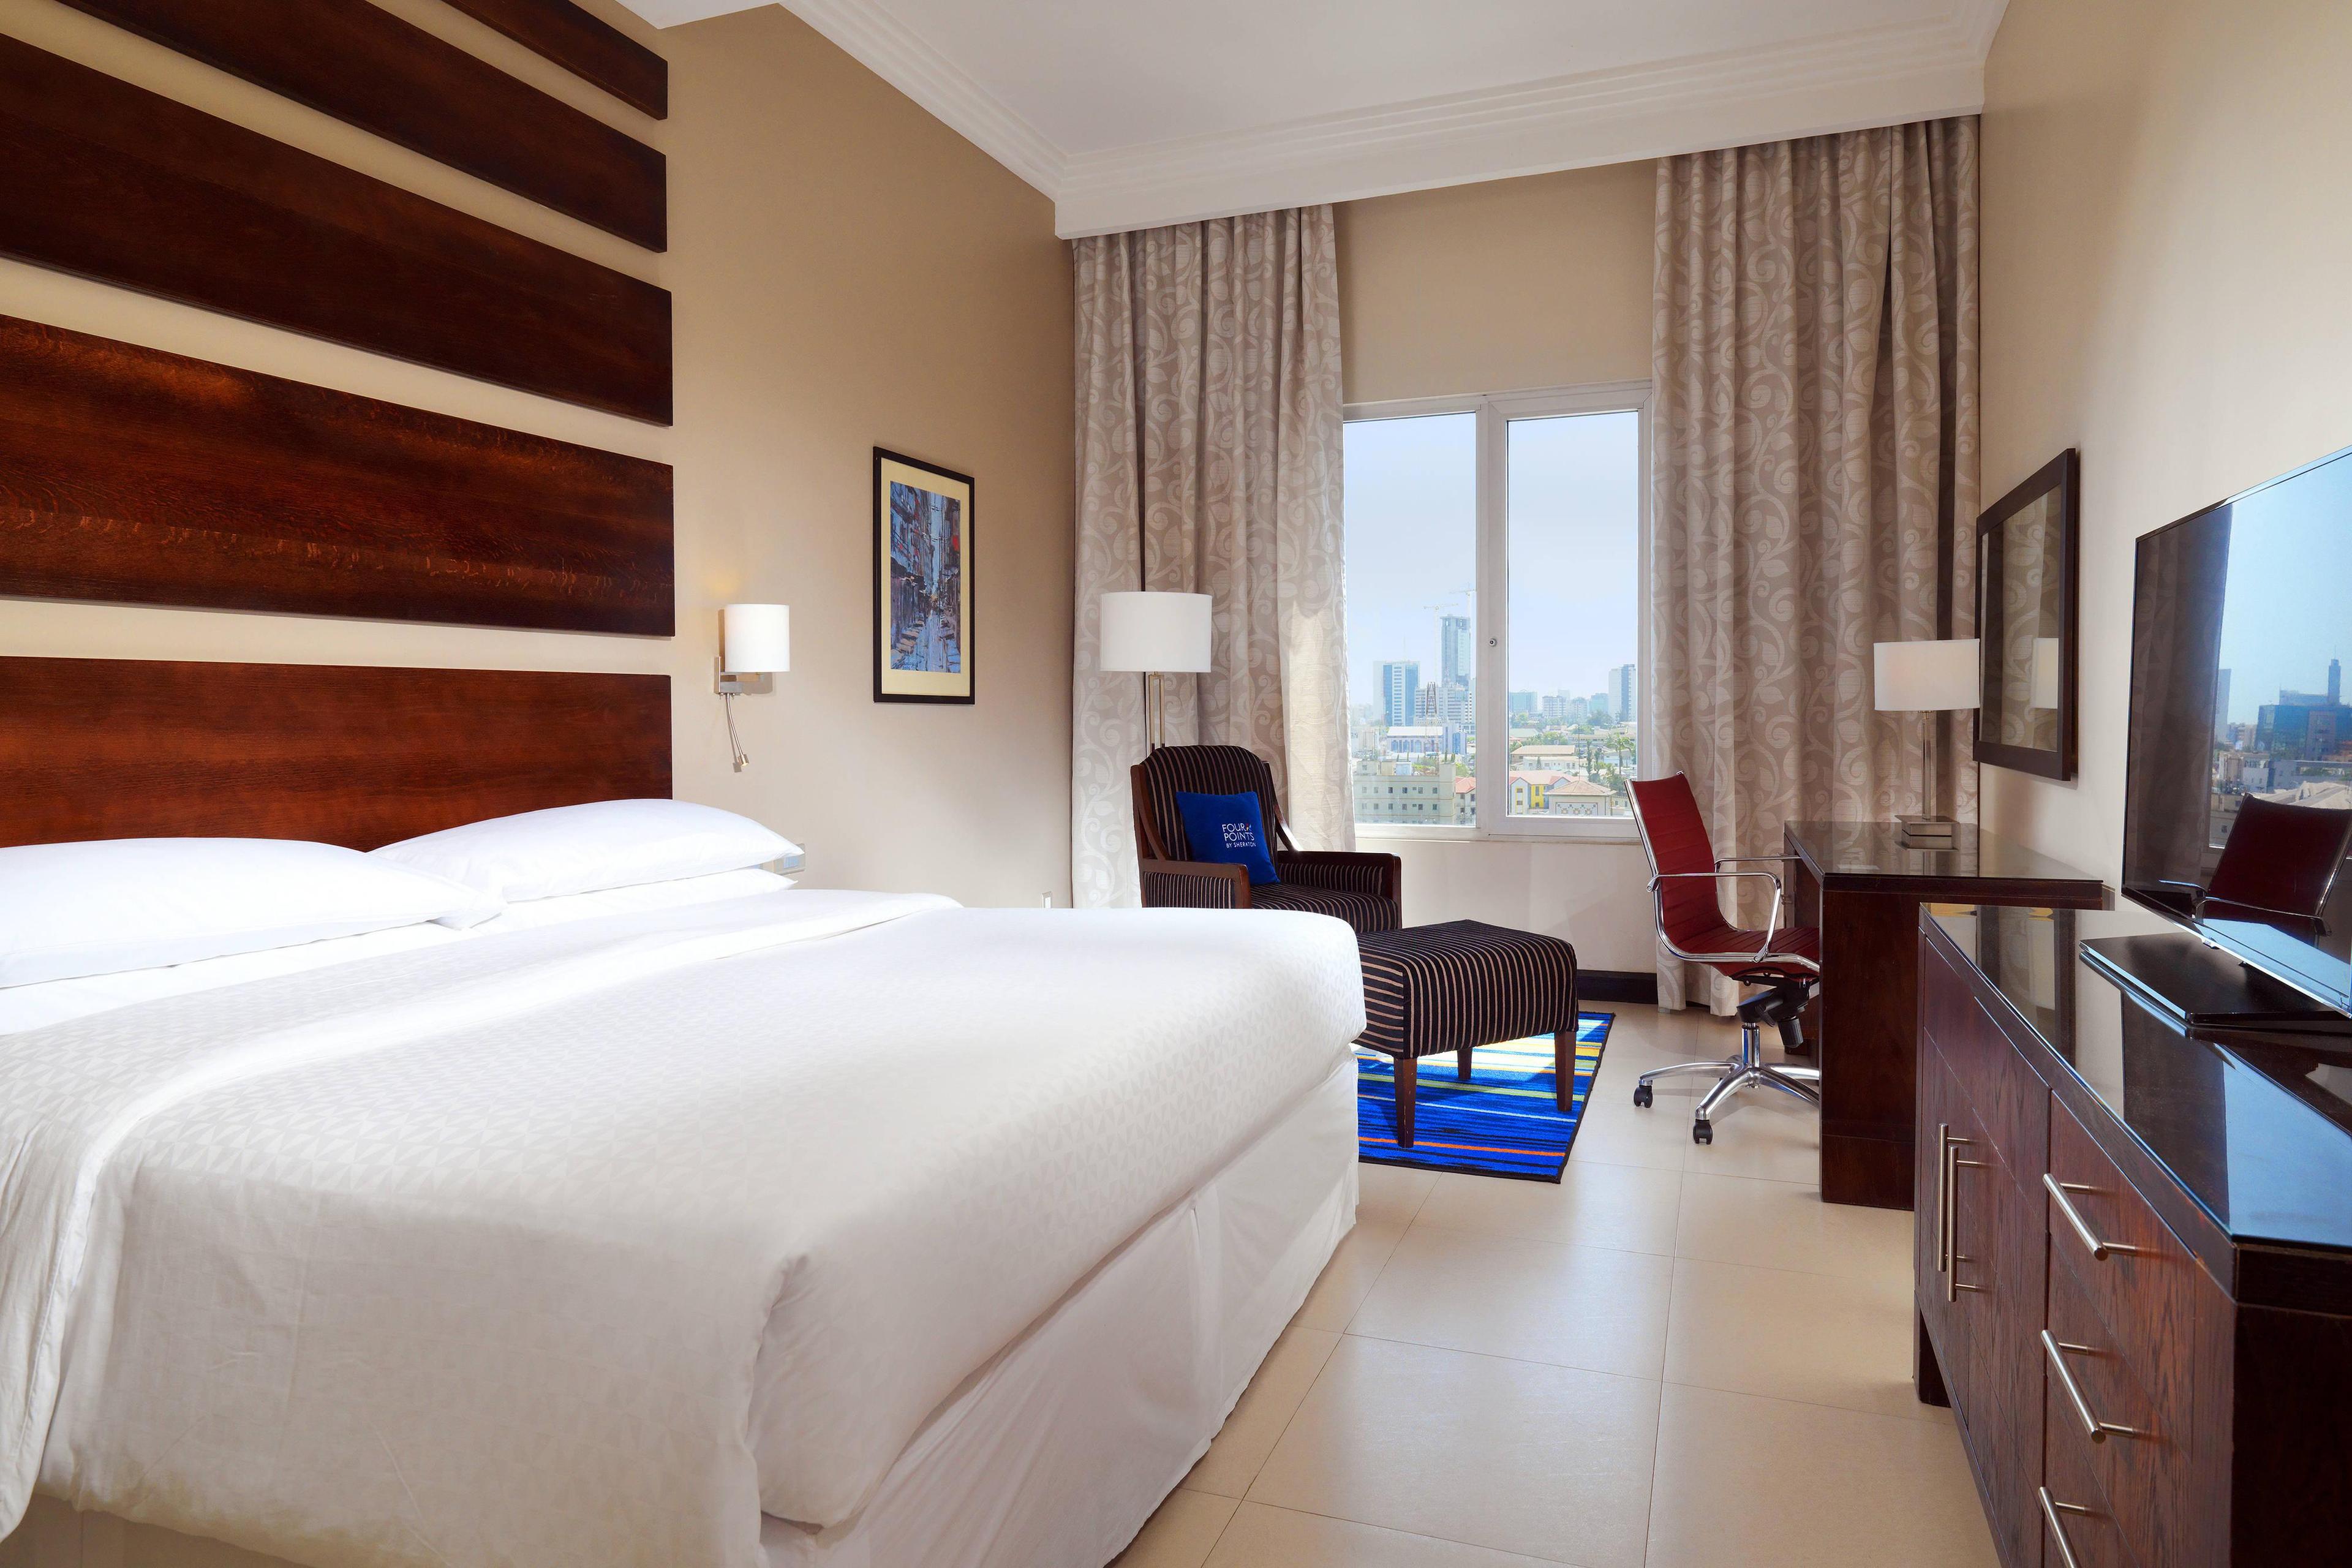 With all the amenities to make your stay enjoyable and convenient, our suites are the perfect home away from home.